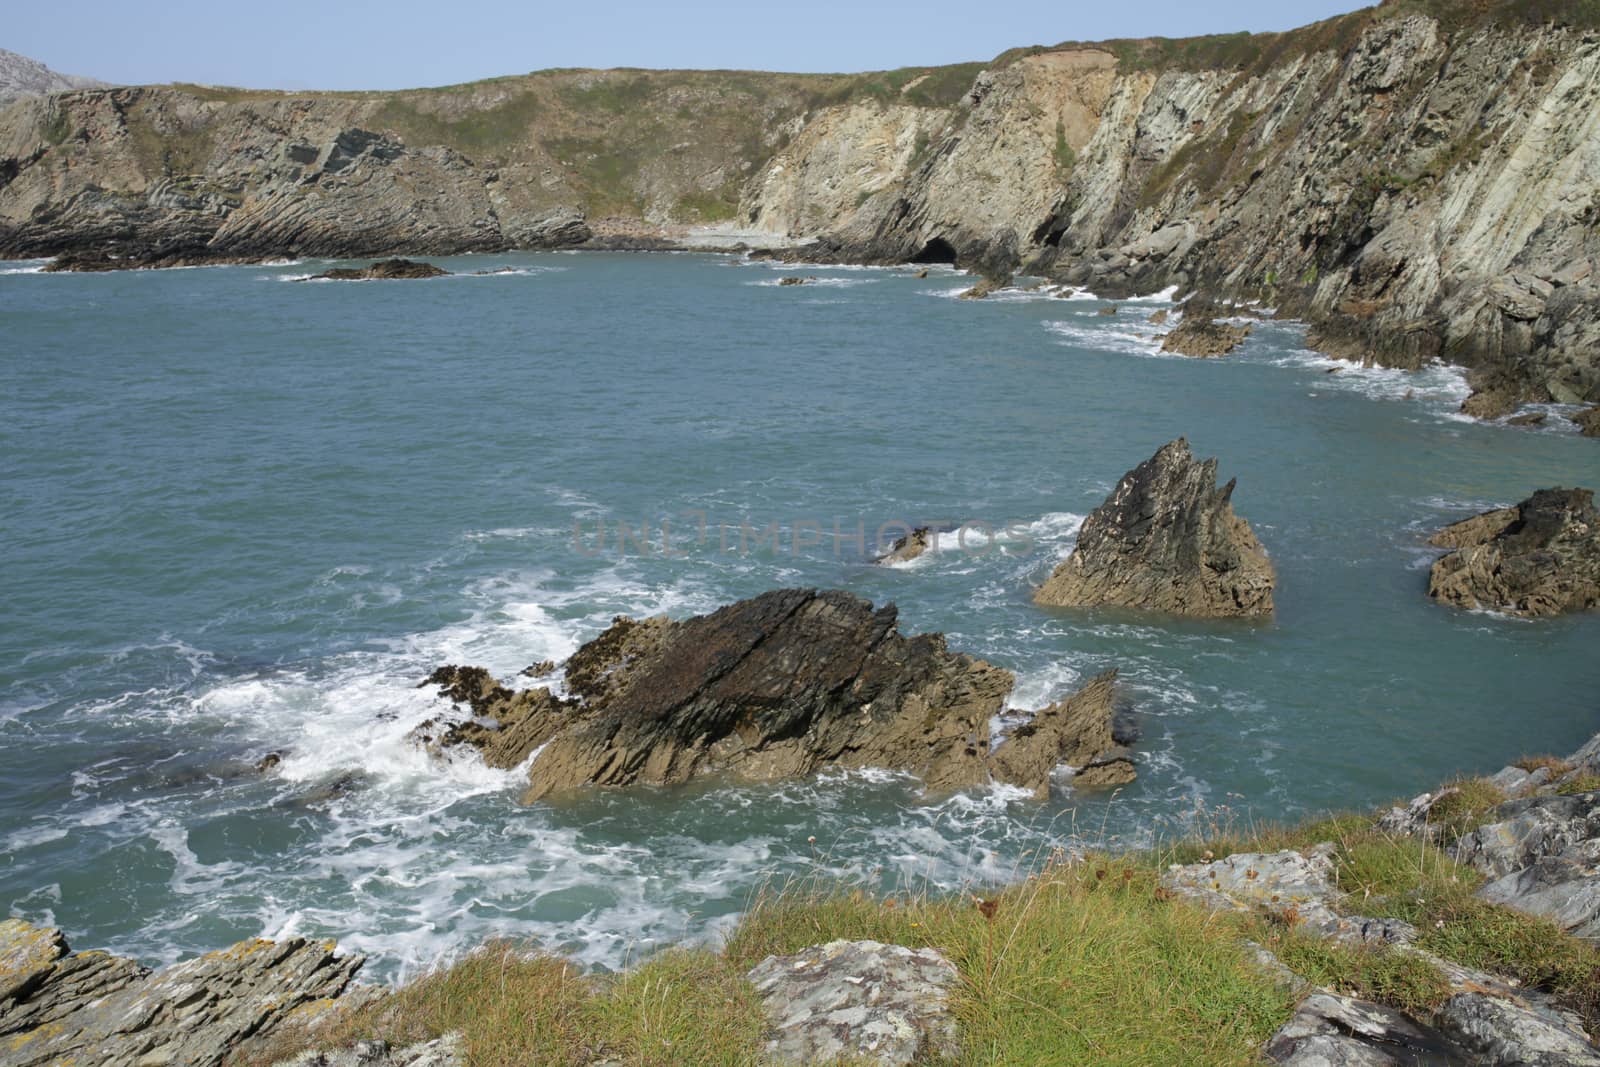 A view from a cliff top across the sea with rocks to cliffs enclosing Abraham's bosom bay, wales coast path, anglesey, Wales, UK.